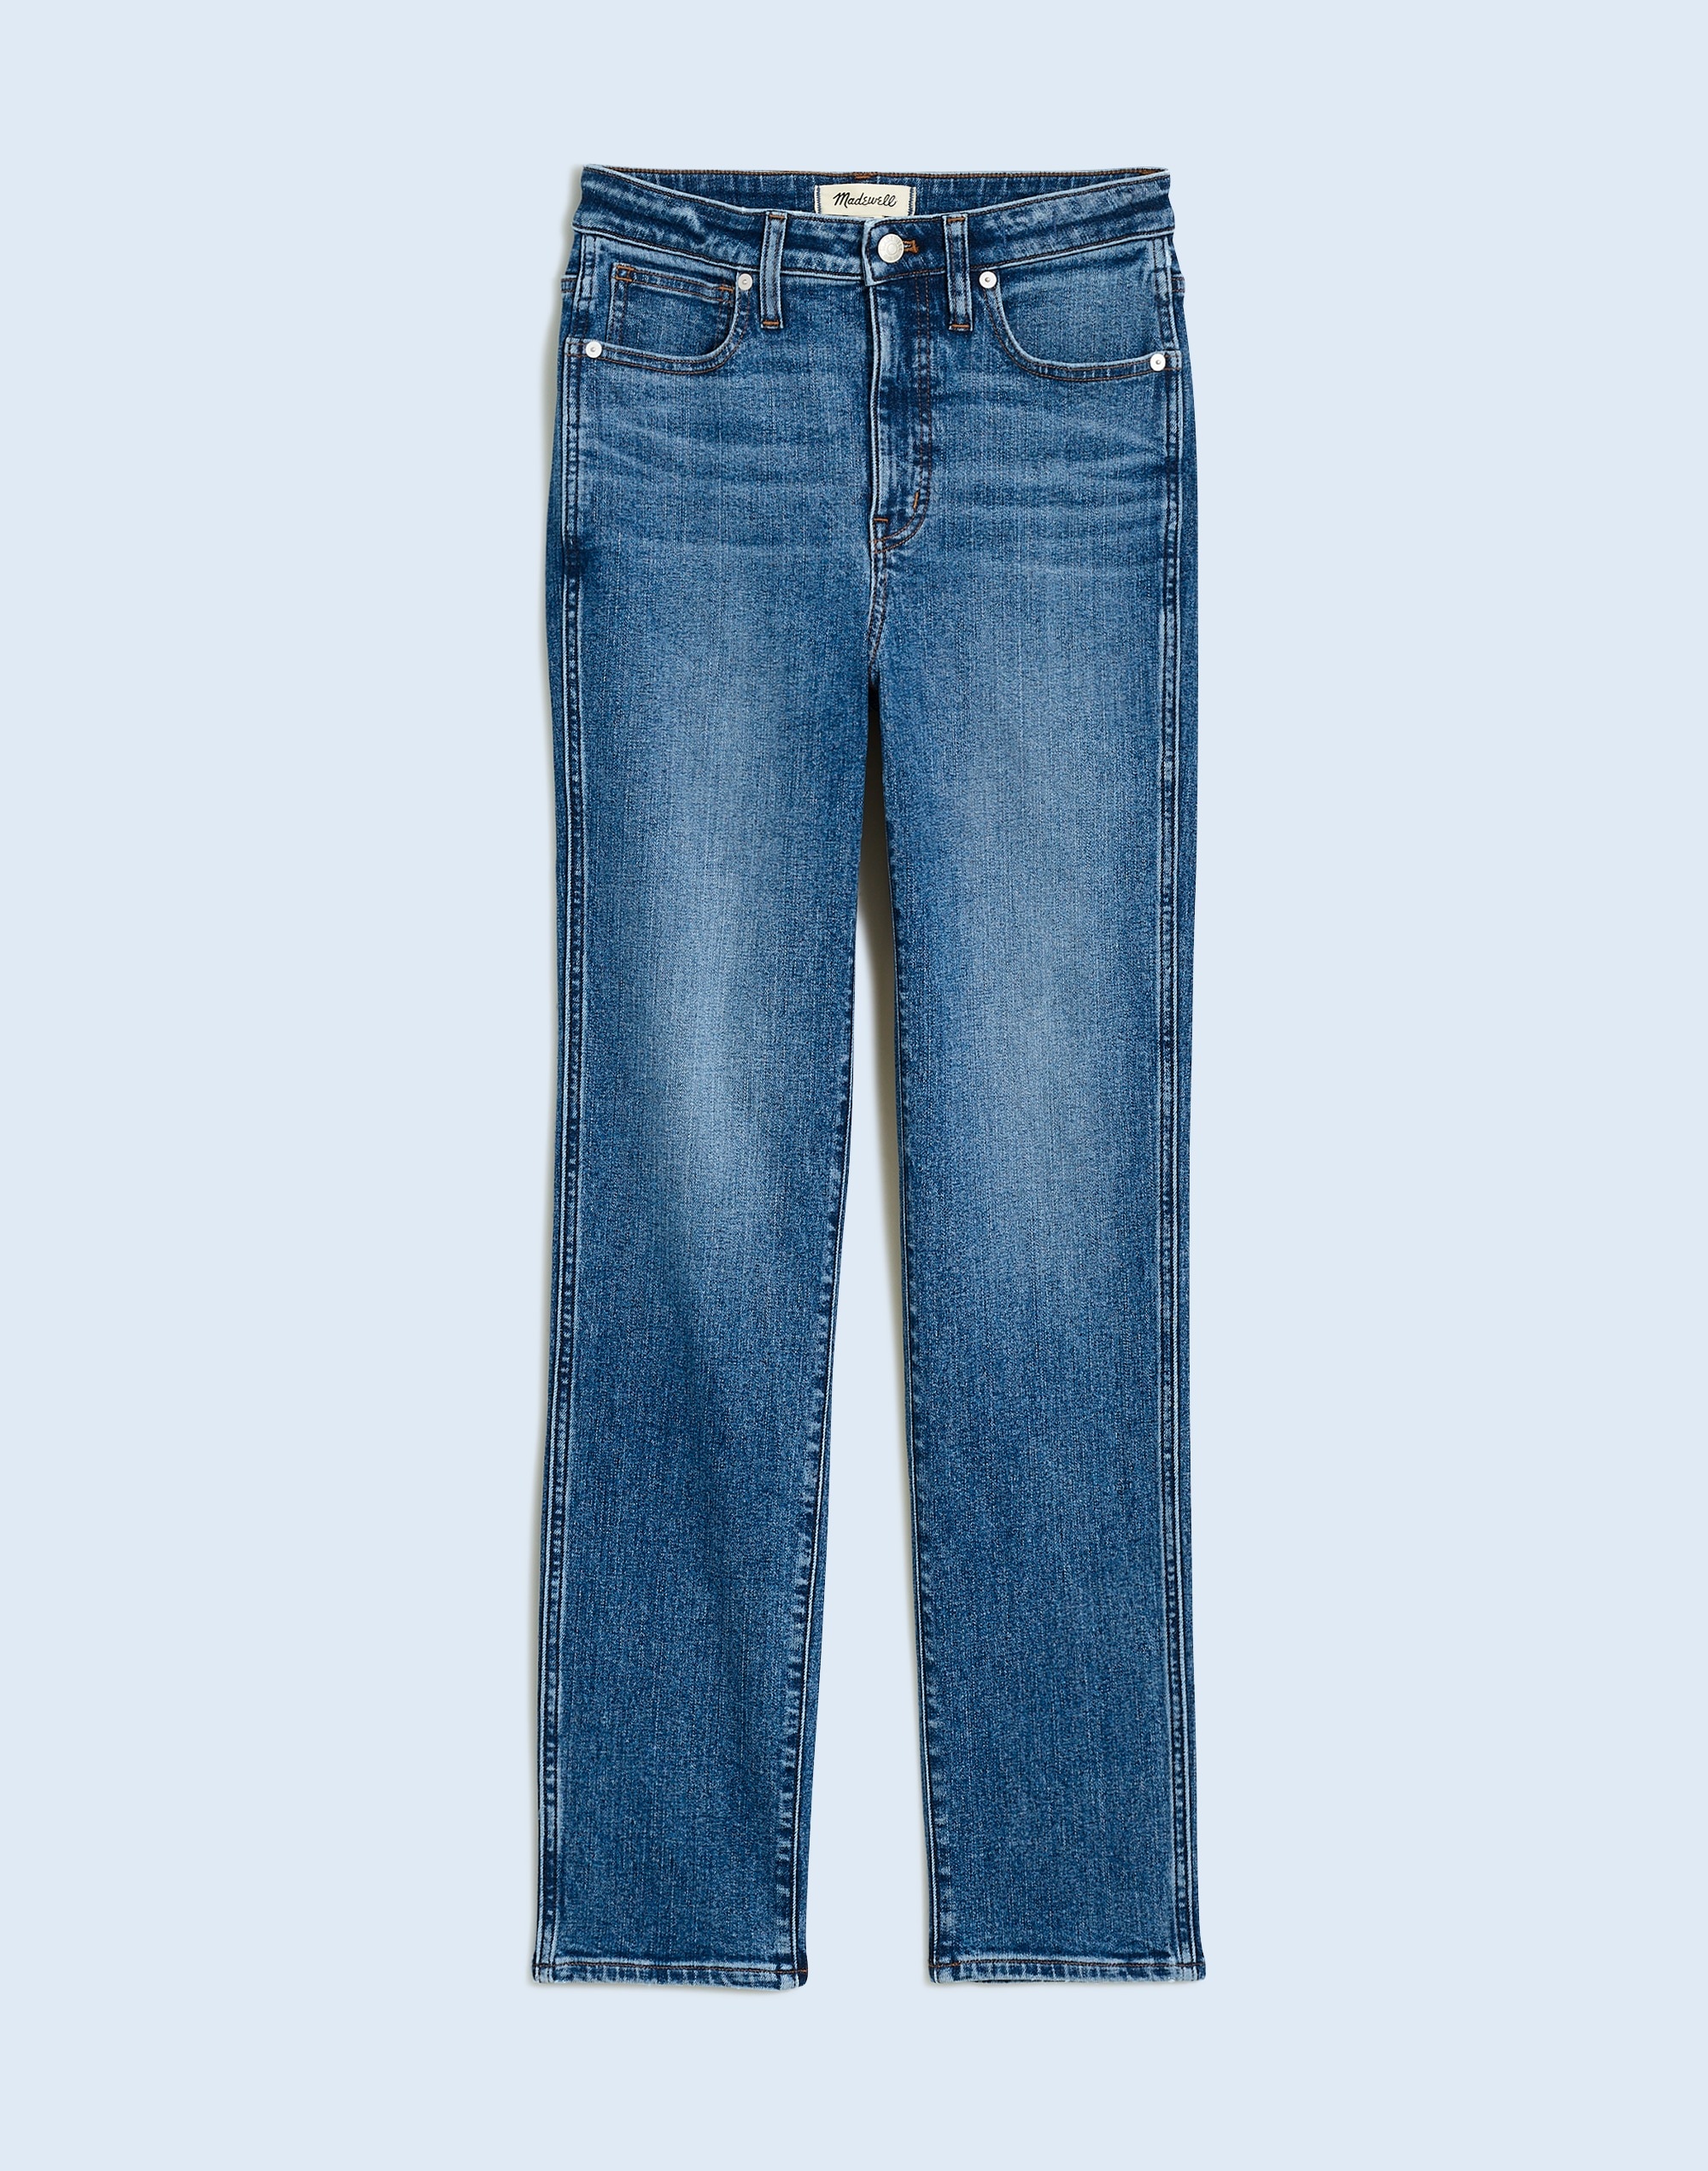 The Petite Curvy Stovepipe Jeans